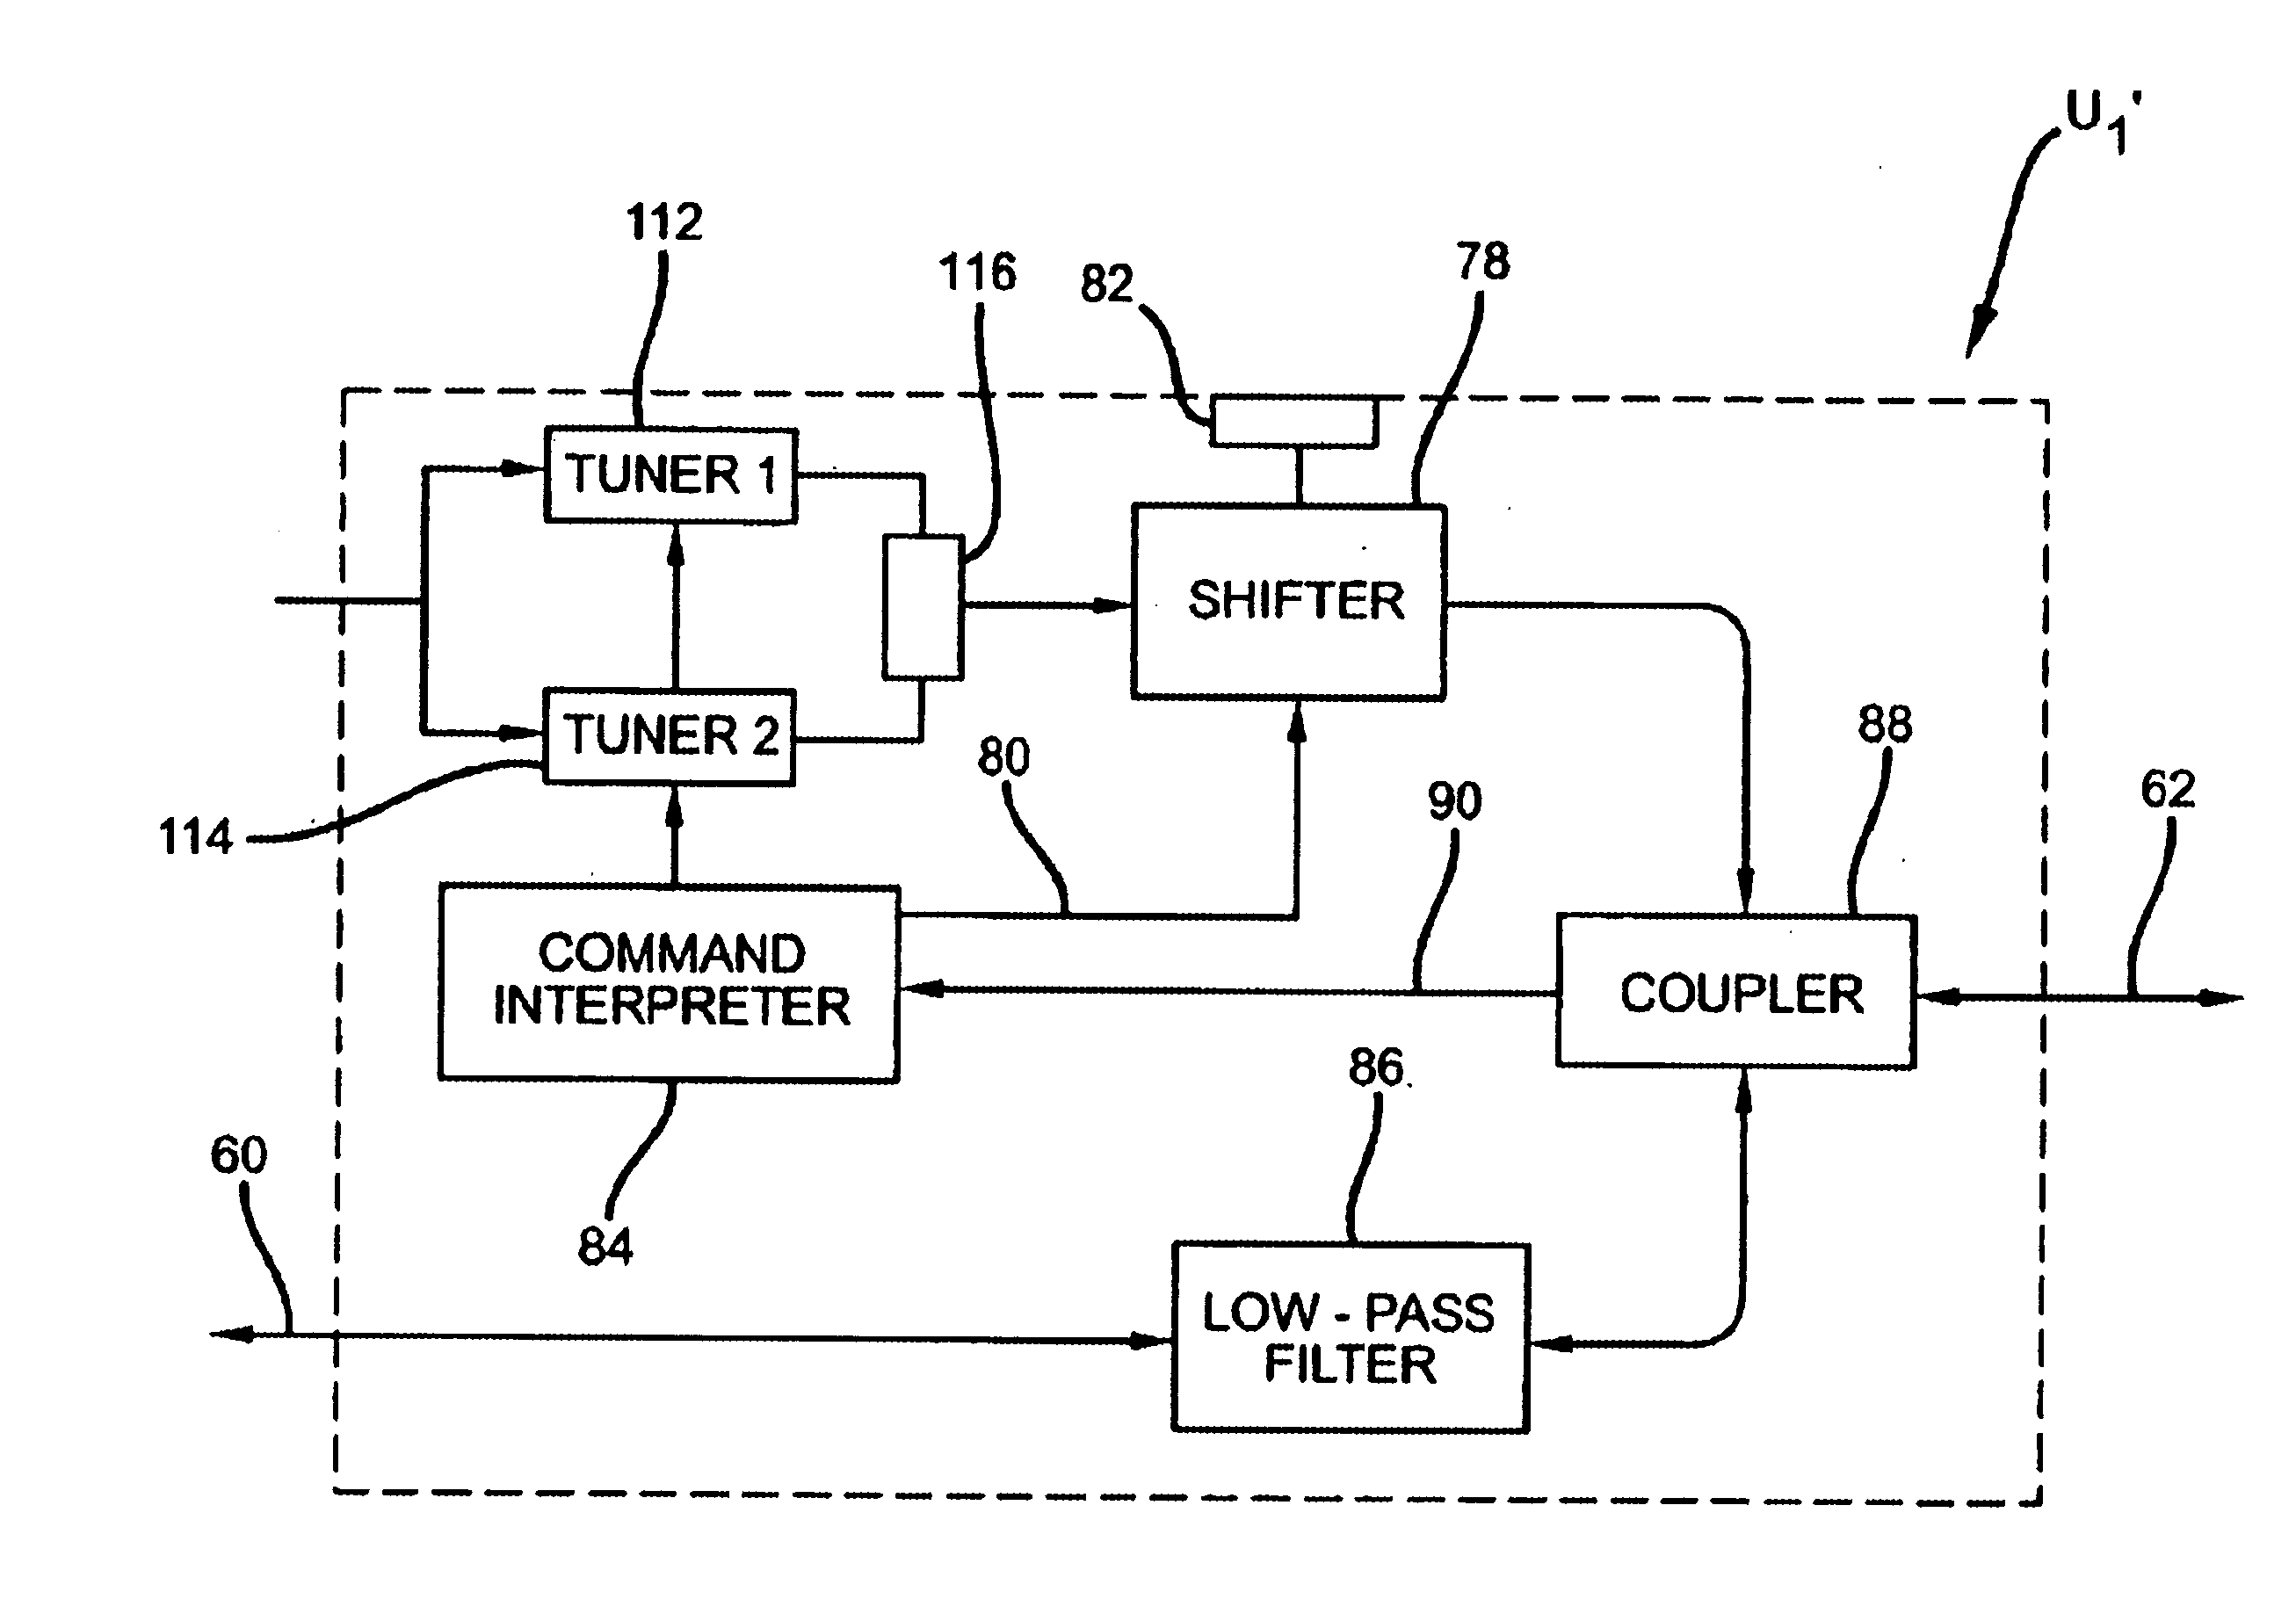 Video transmission system and method utilizing phone lines in multiple unit dwellings